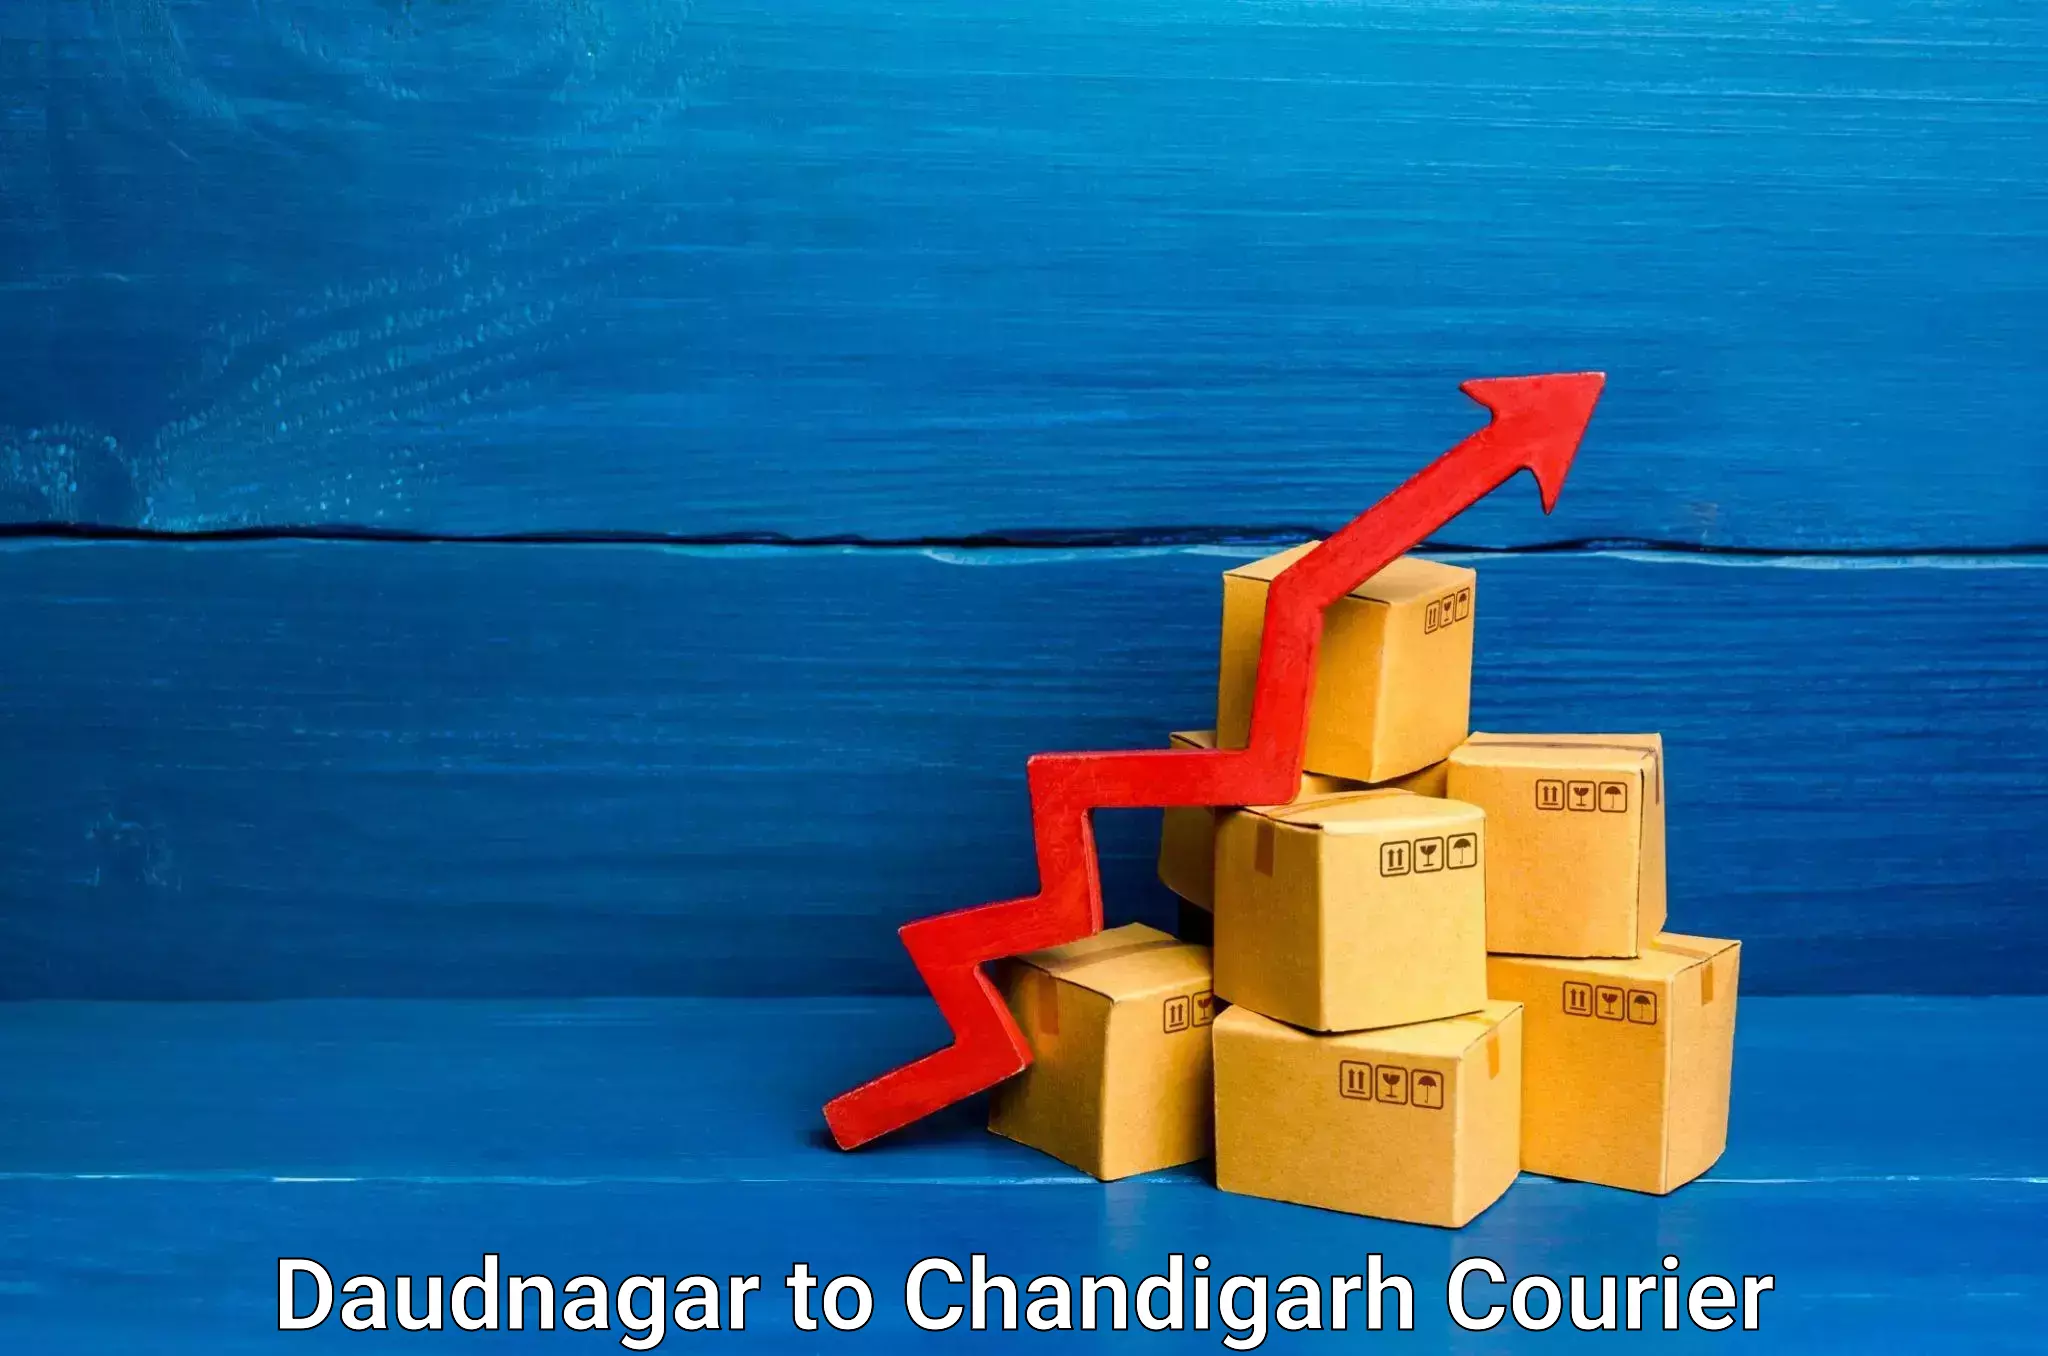 Trusted relocation experts Daudnagar to Chandigarh